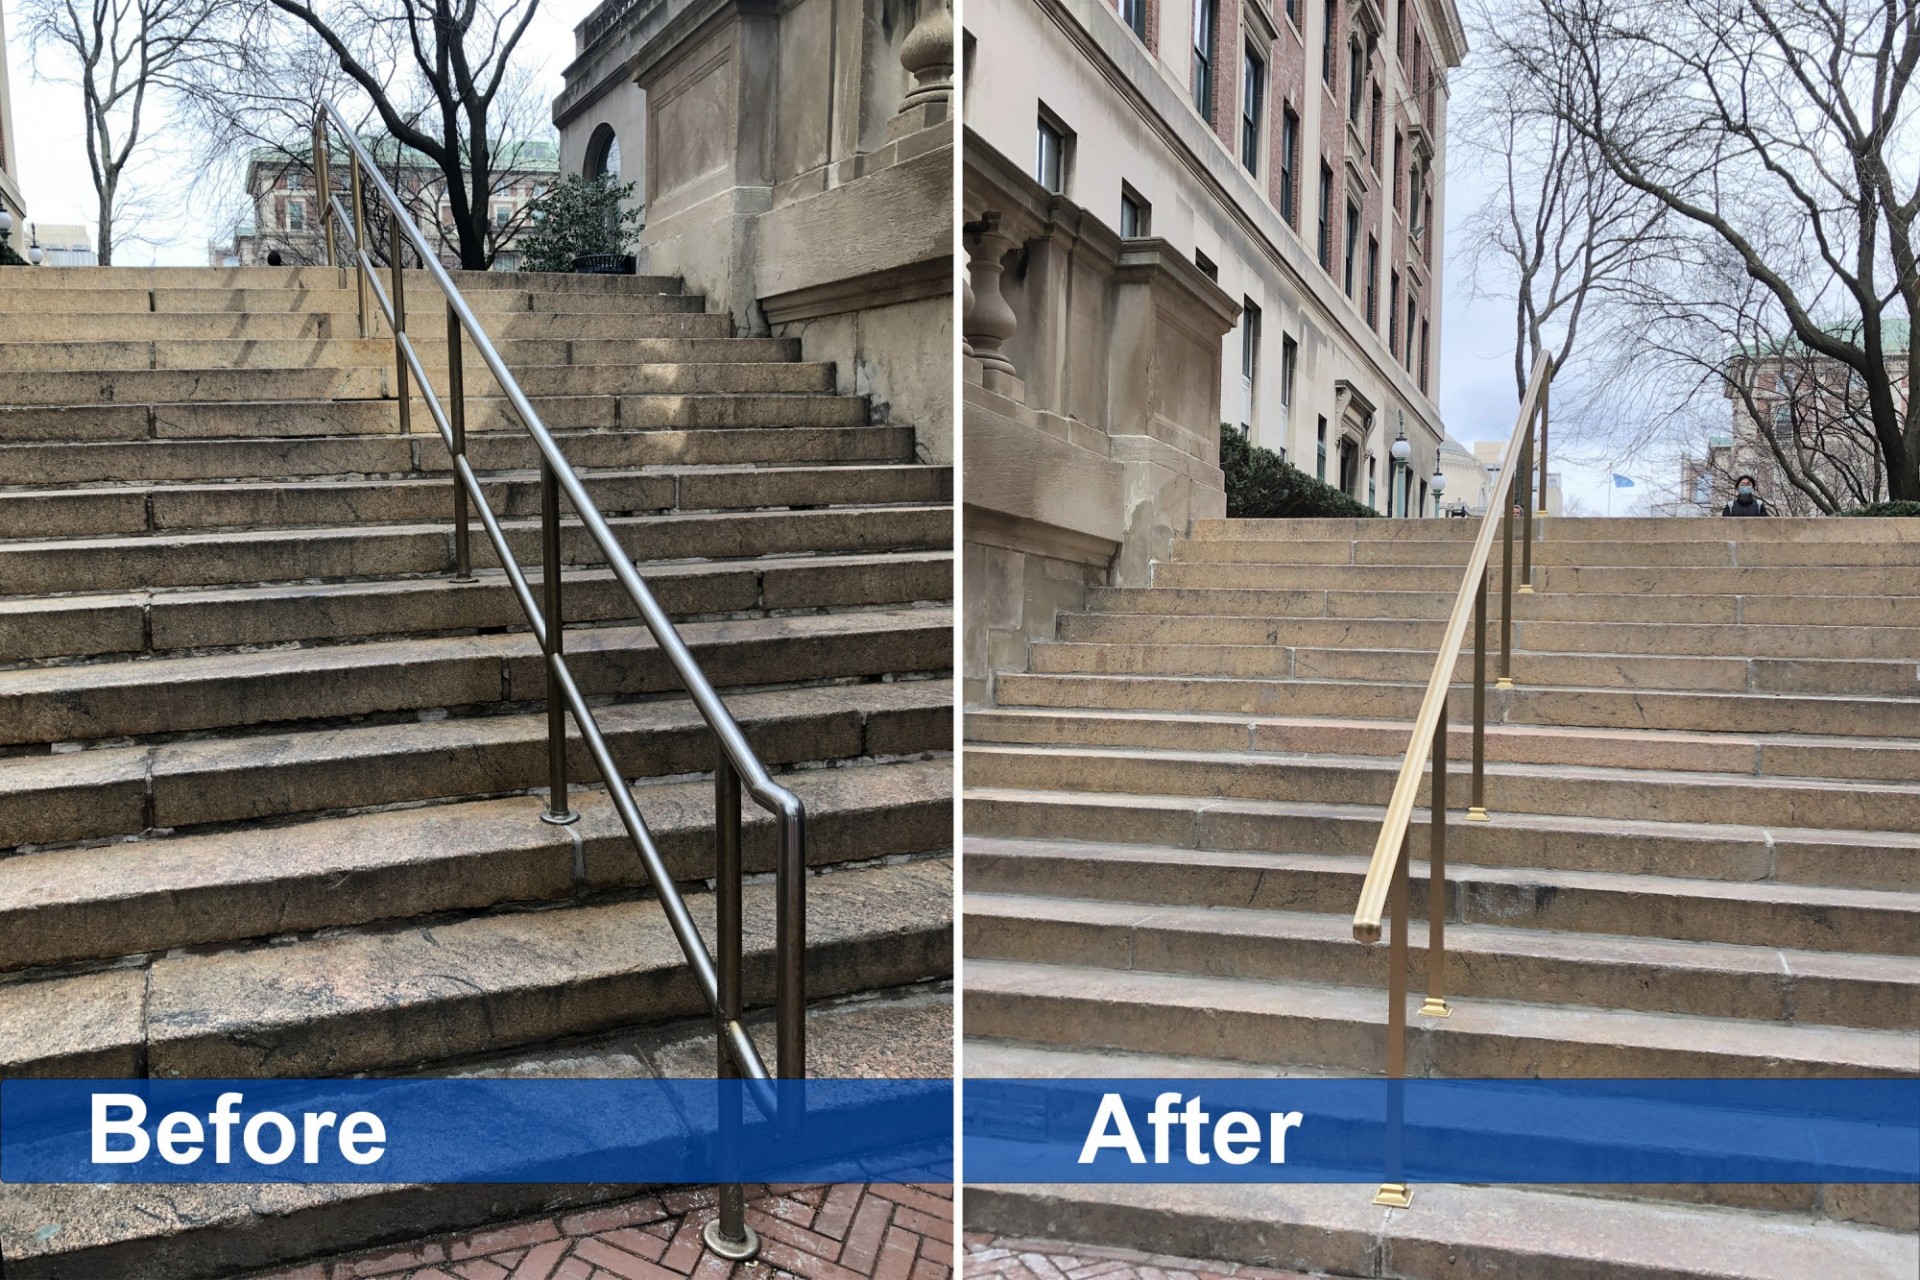 Before and after photos of the granite step renovation and handrail replacement at the 114th Street entrance